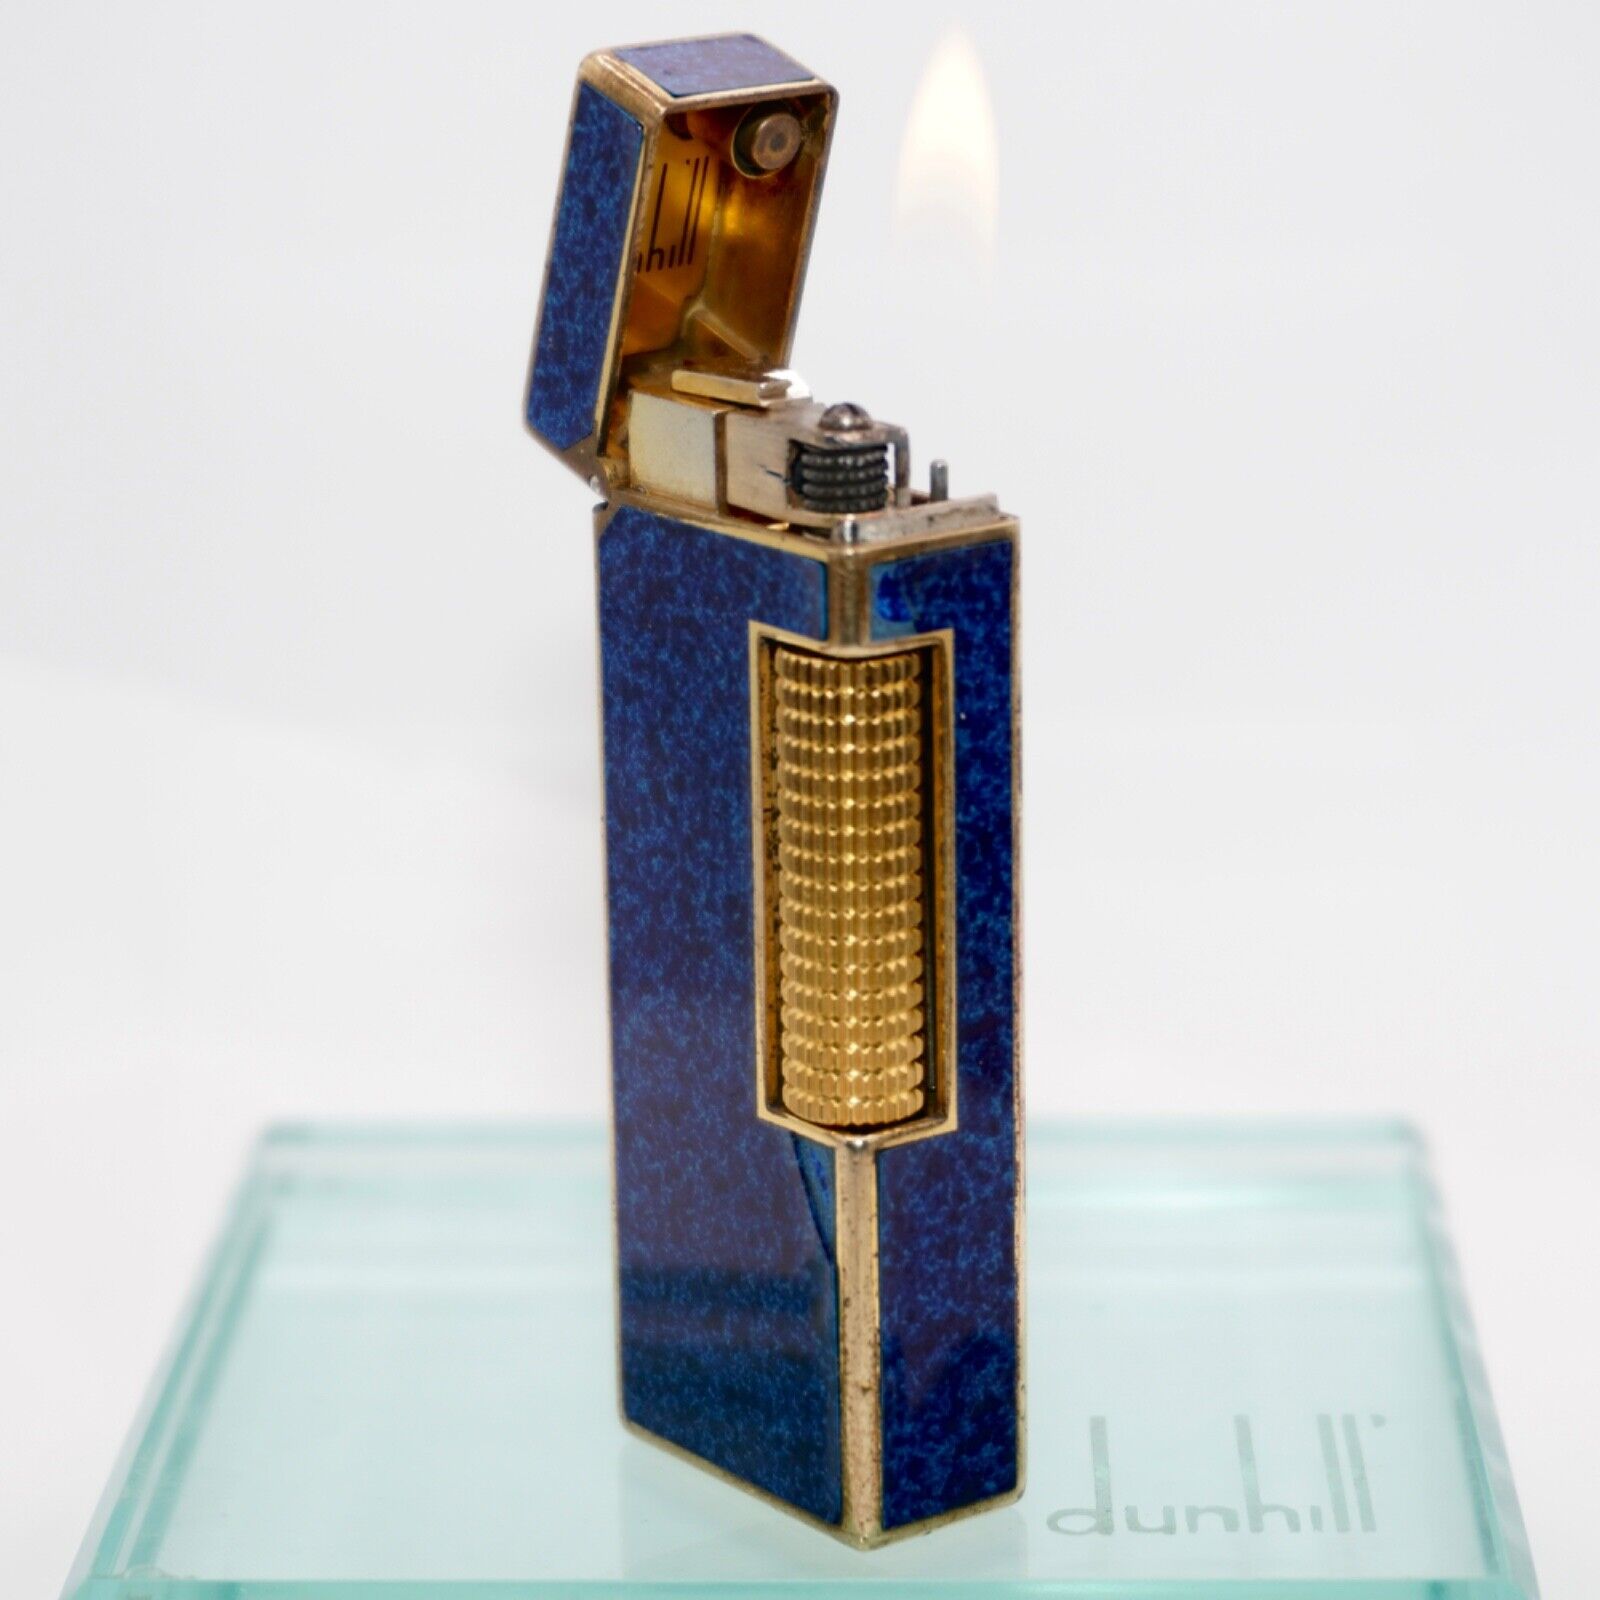 Rare Dunhill Vintage Rollagas Lighter Gold/Blue Ultrasonically Cleaned_WORKING_B